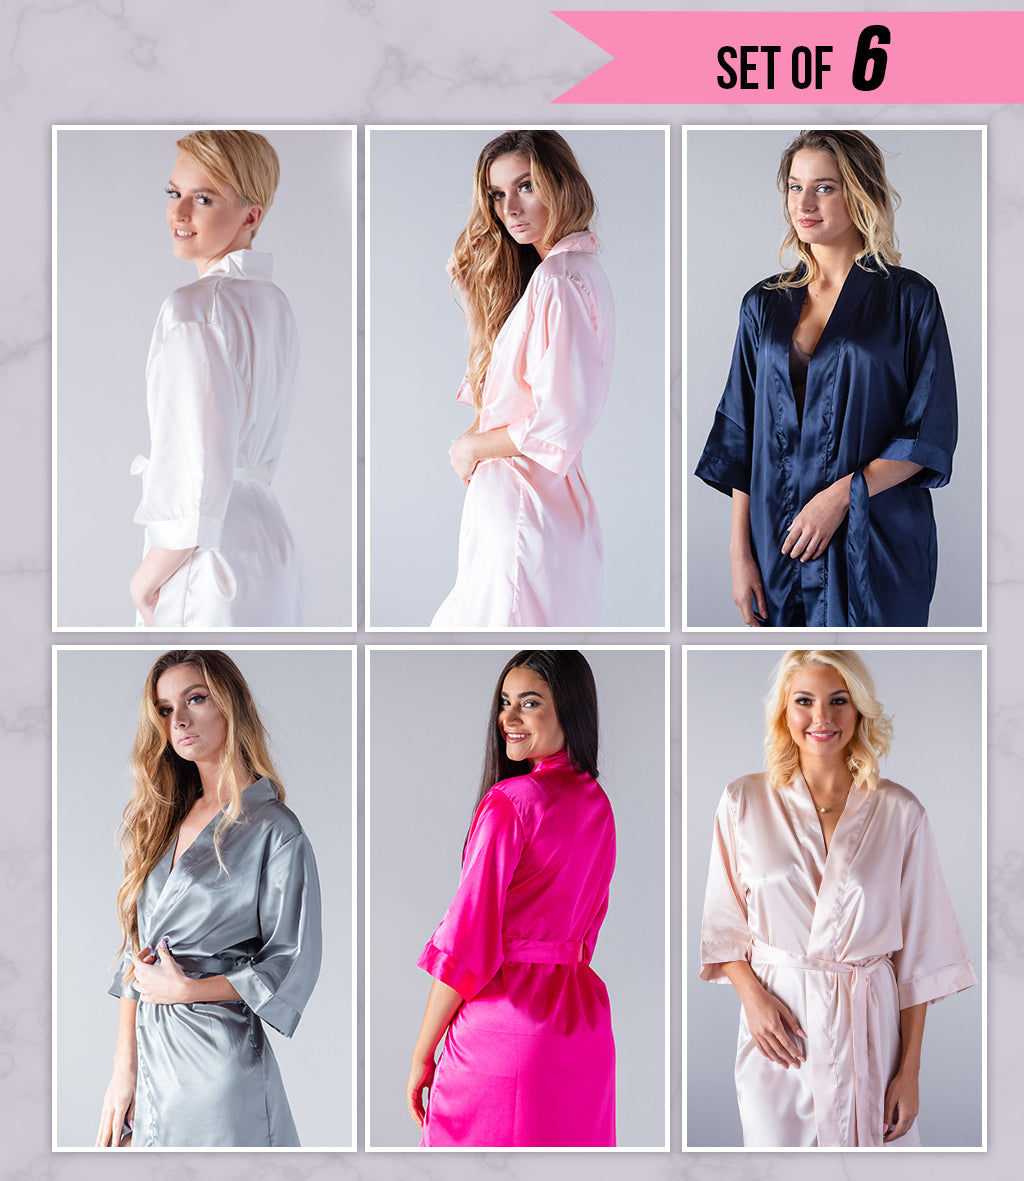 Set of 6 Robes - Plain, Floral, and Lace Robes